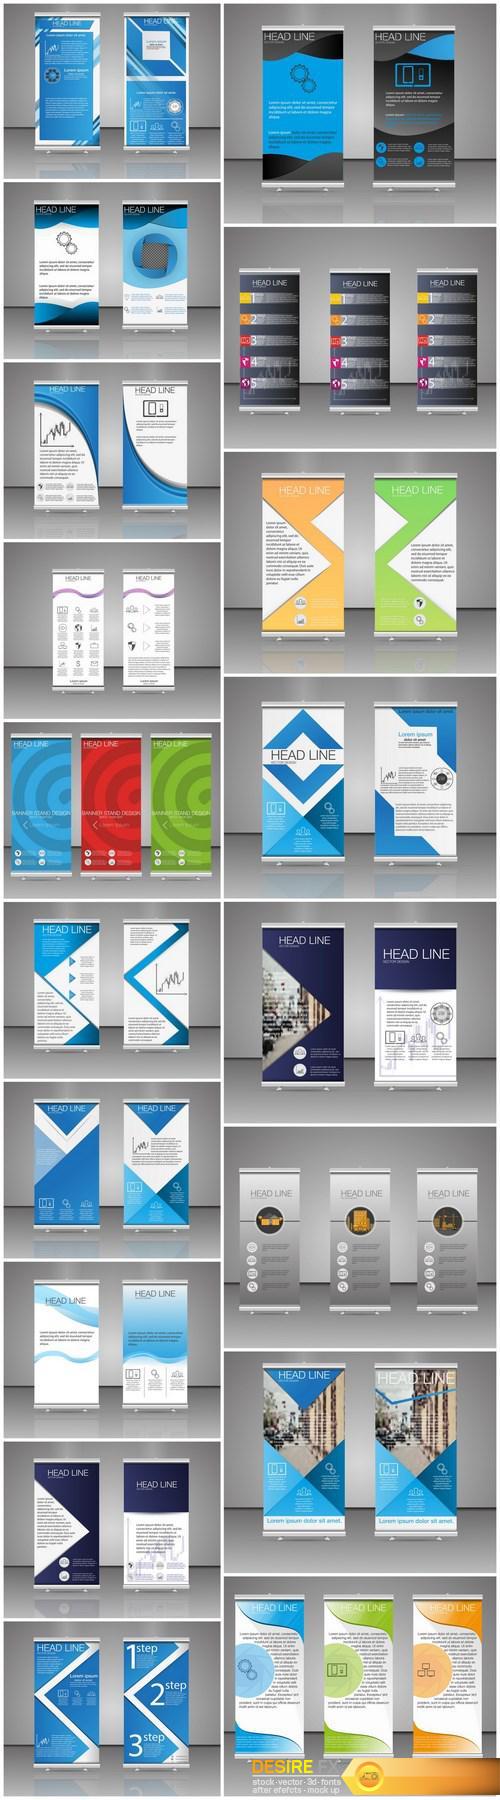 Corporate vertical vector flyer & roll up banner 4 - 18xEPS